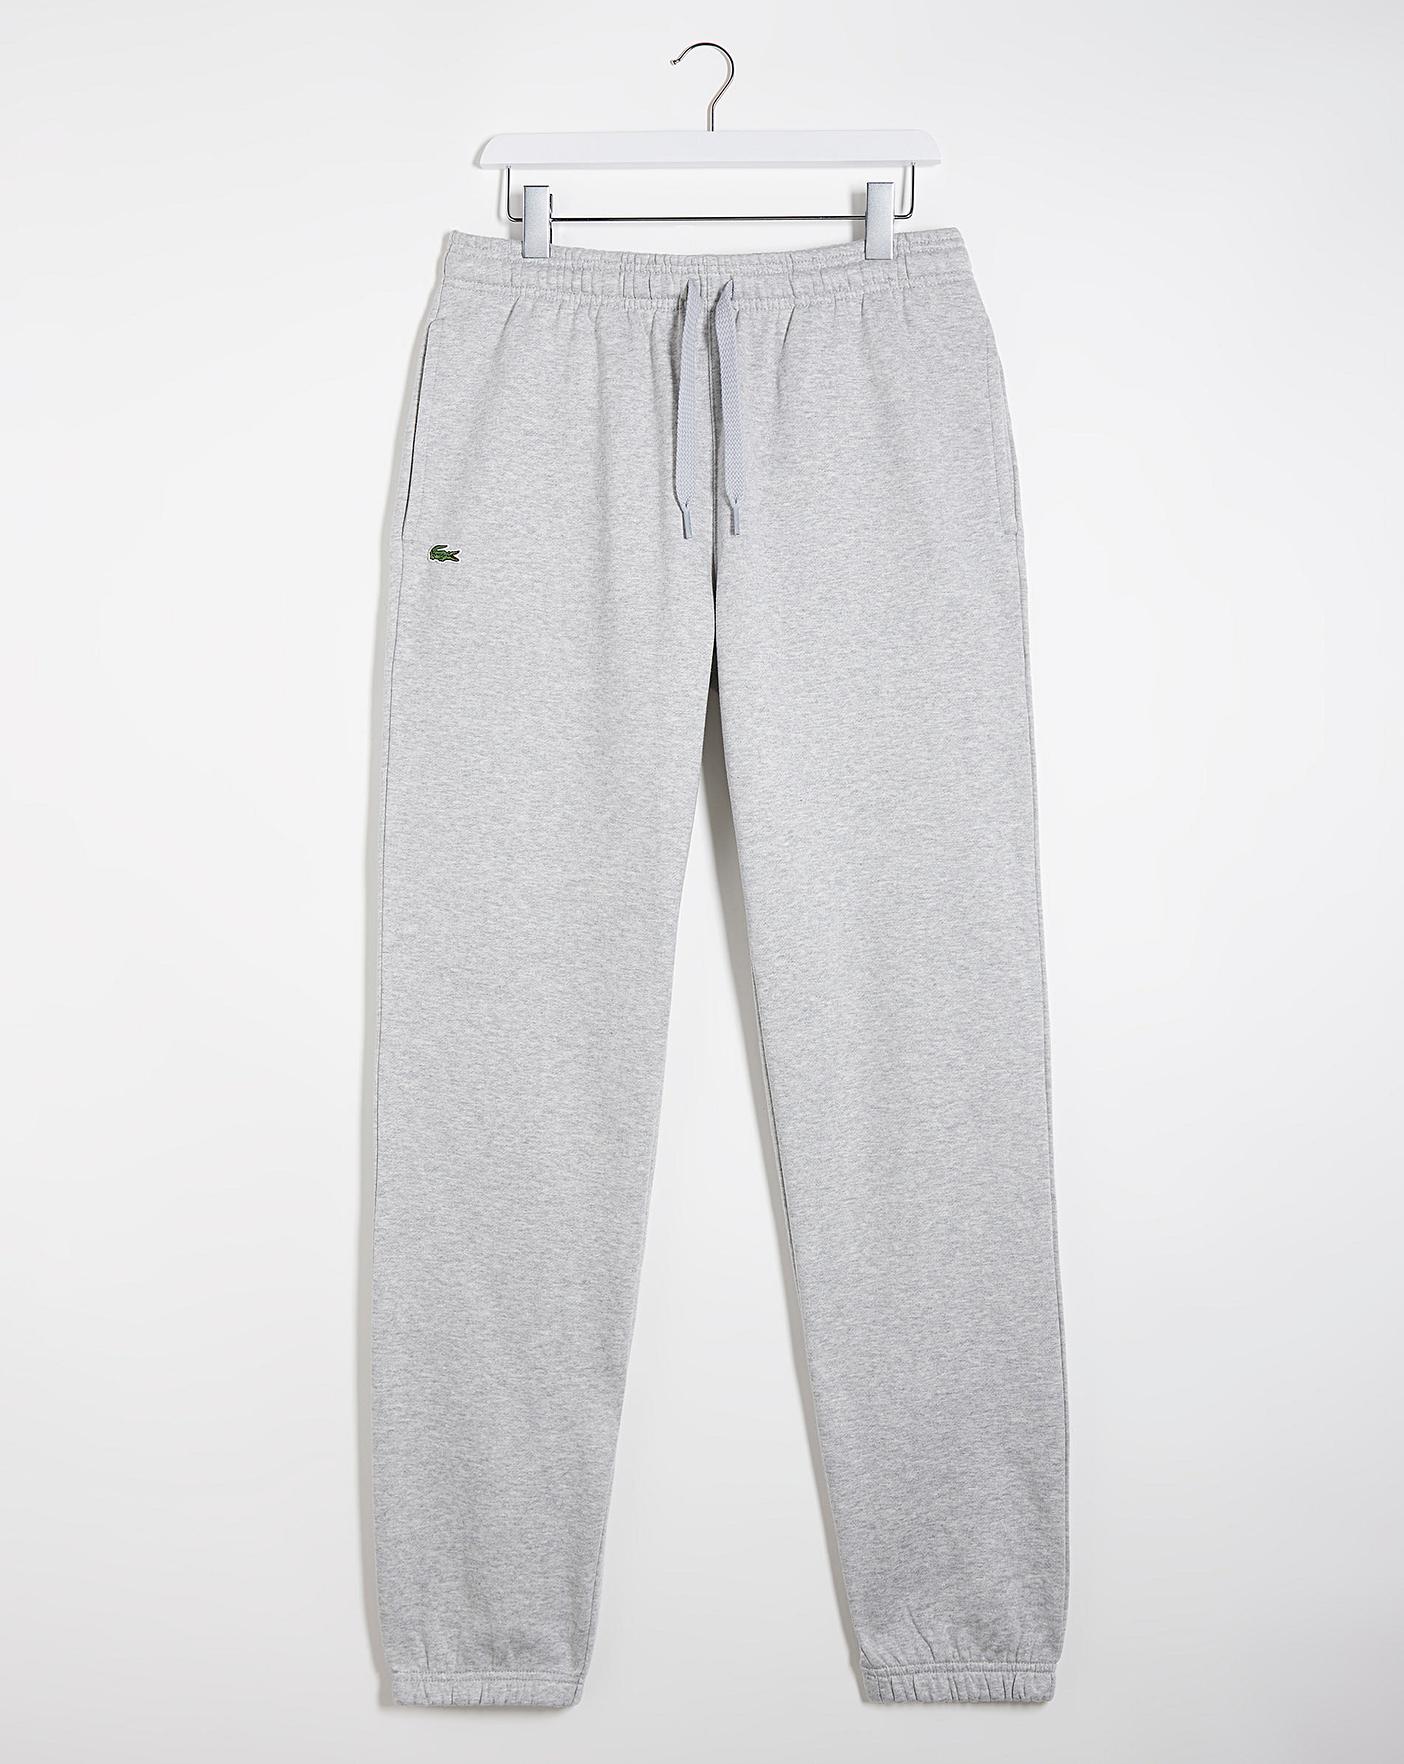 grey lacoste track pants